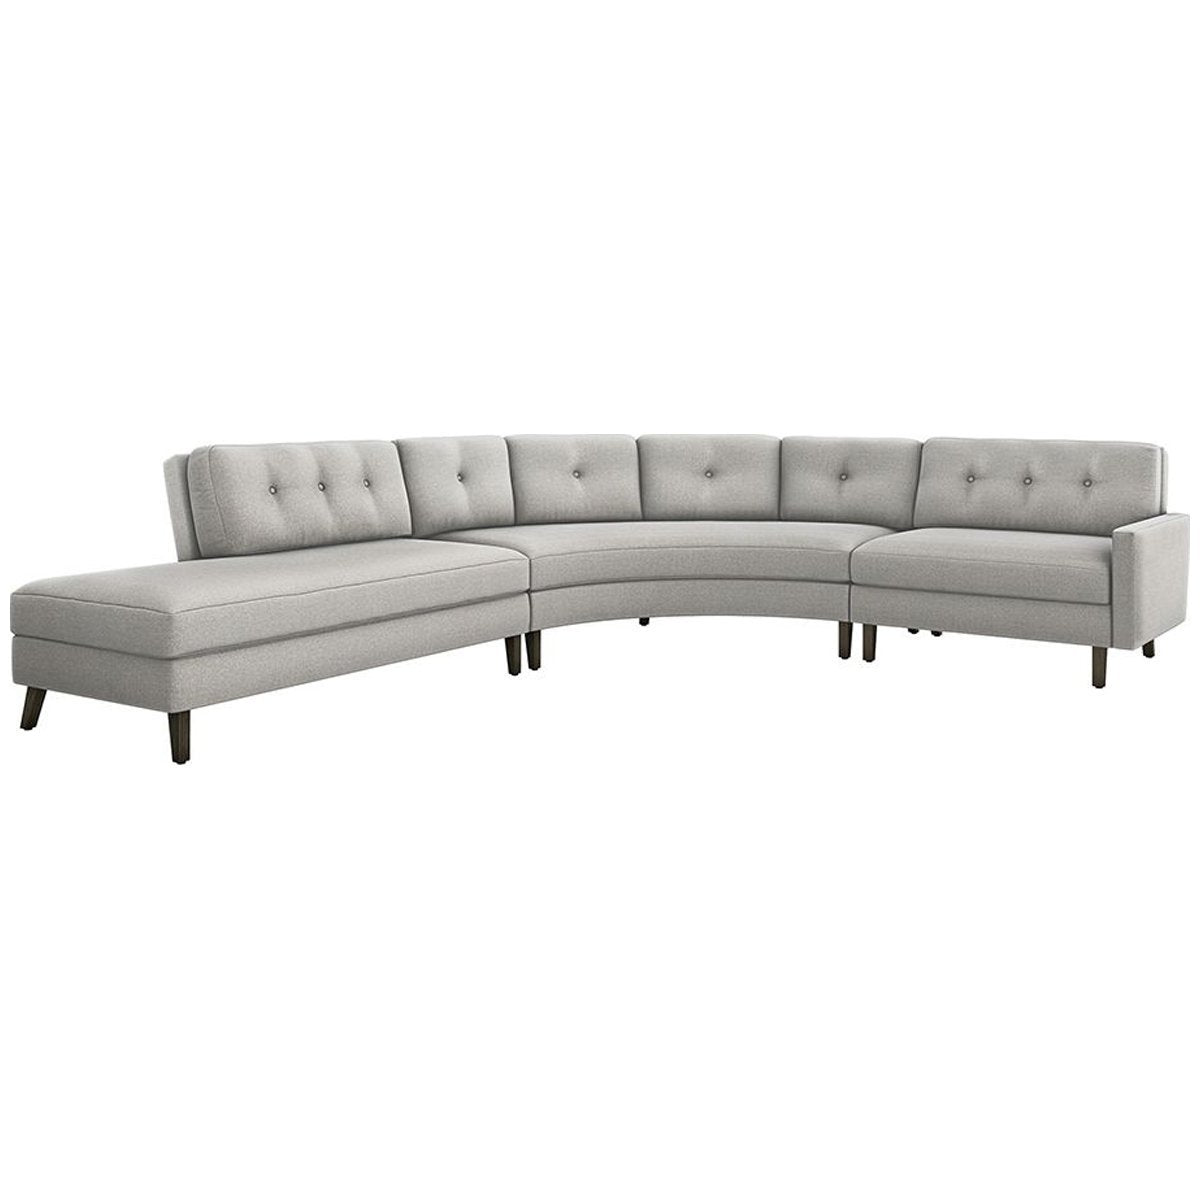 Interlude Home Aventura Chaise Sectional - Faux Linen